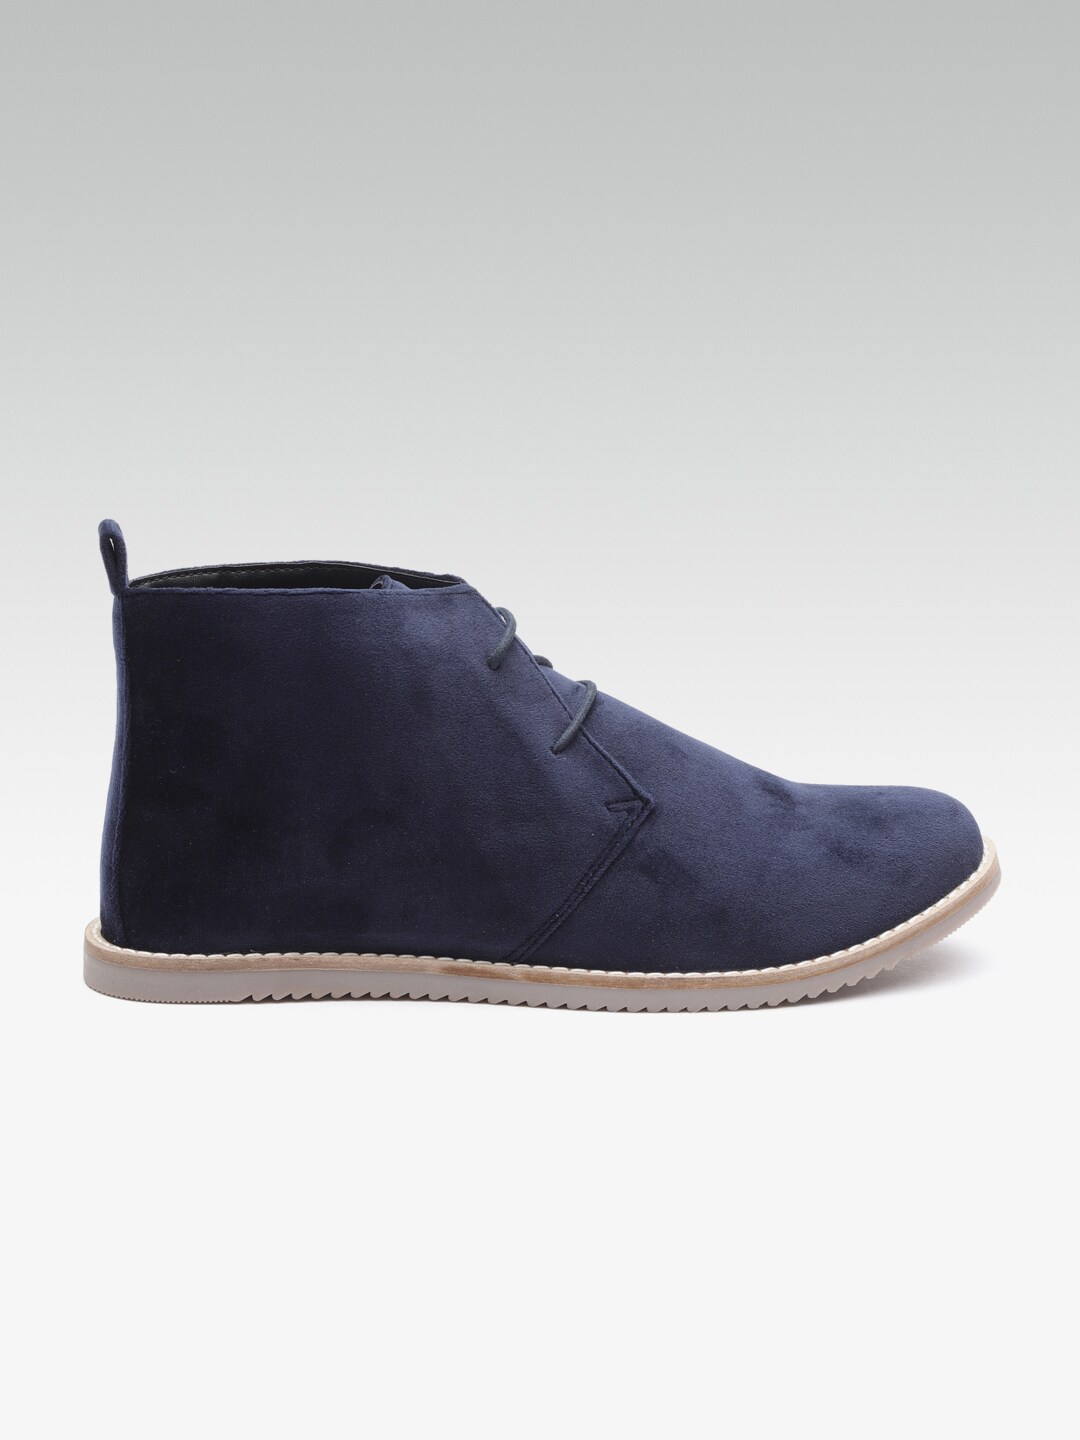 Carlton London Women Navy Blue Solid Mid-Top Flat Boots Price in India